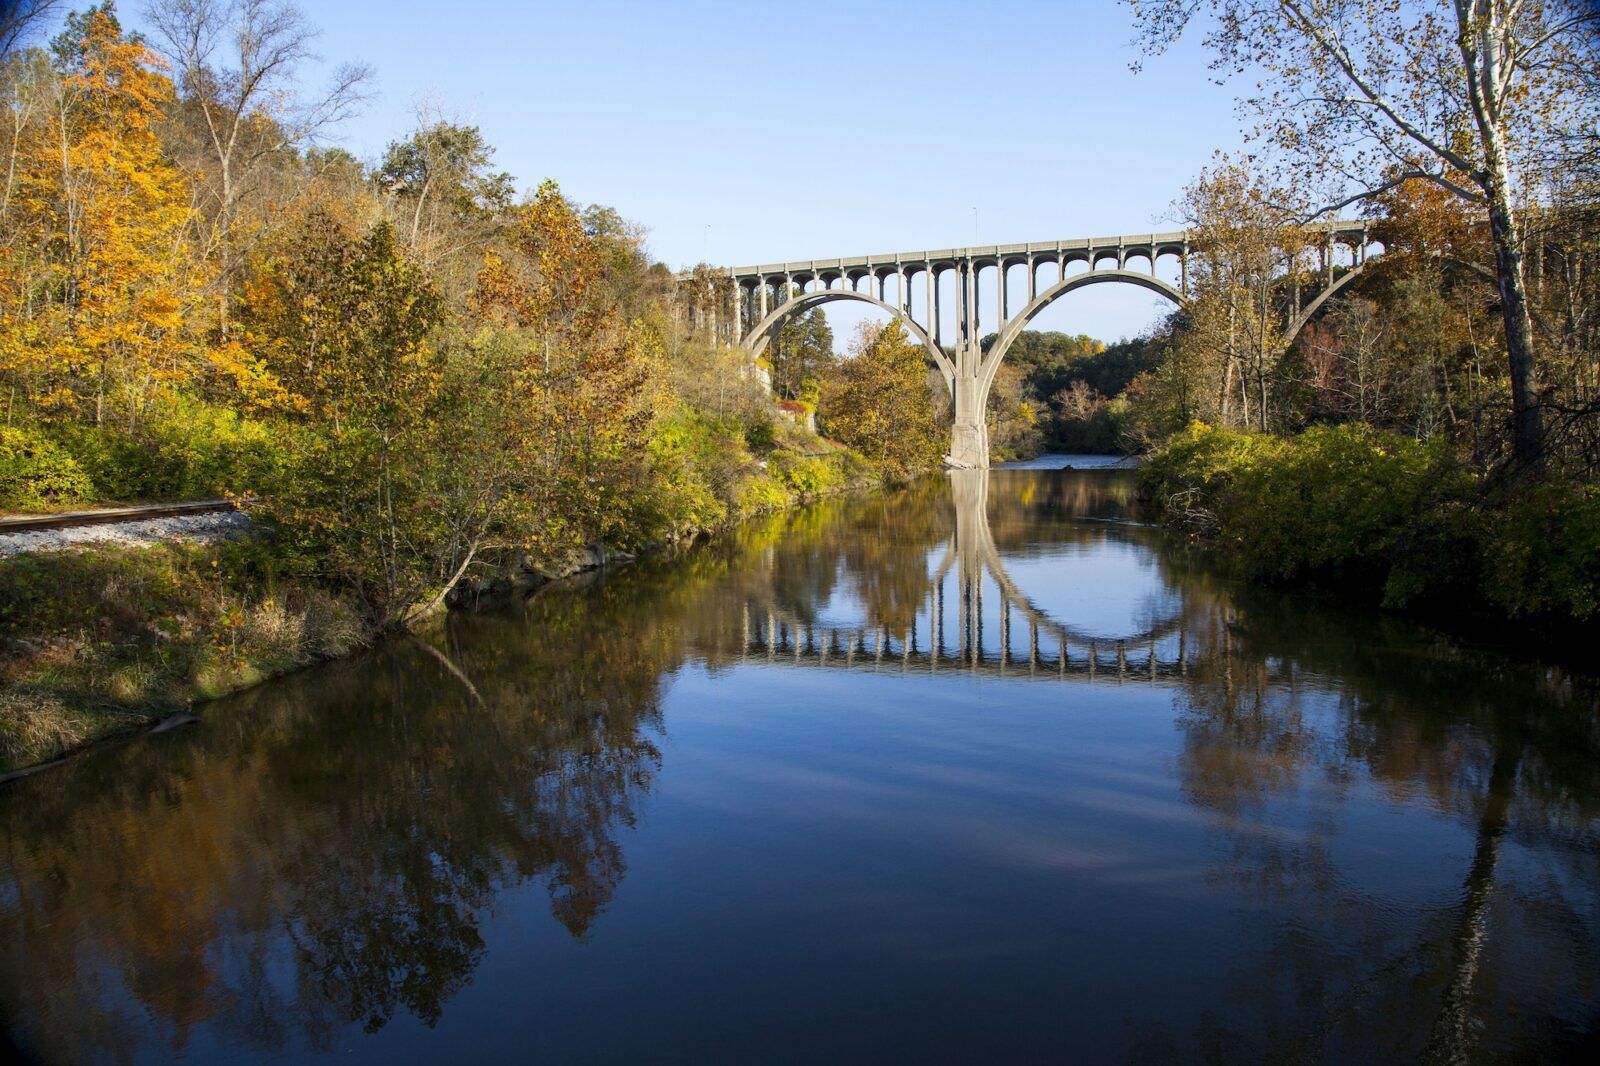 Beautiful shot of a bridge reflecting in the Cuyahoga River in Ohio on a beautiful autumn day